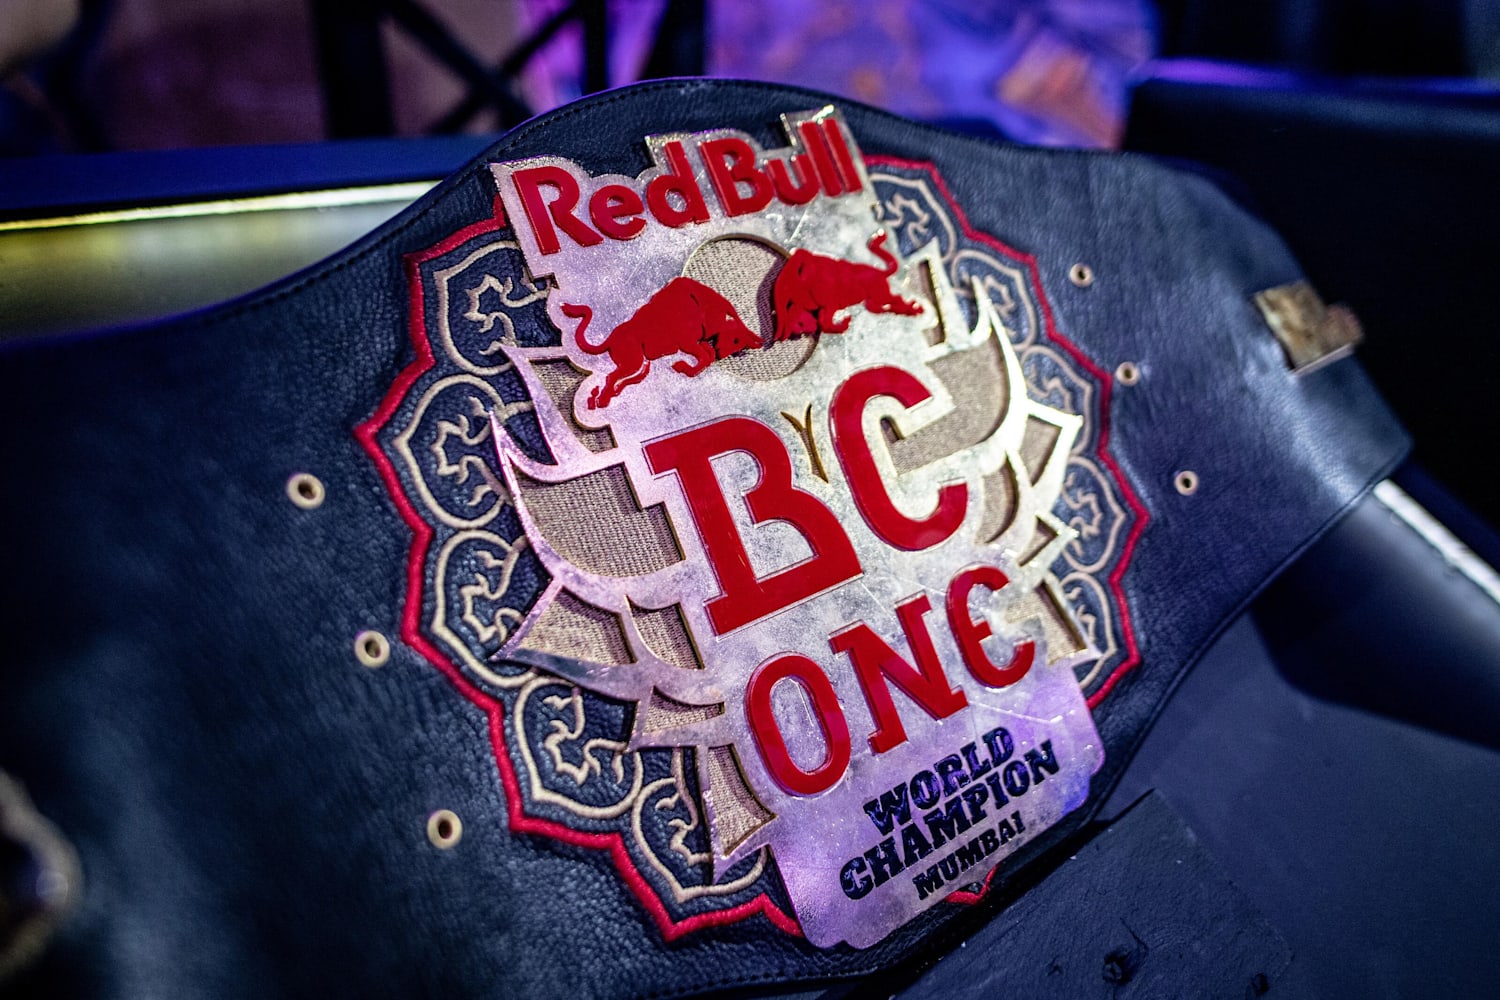 The Red Bull BC One Champions Hall of Fame